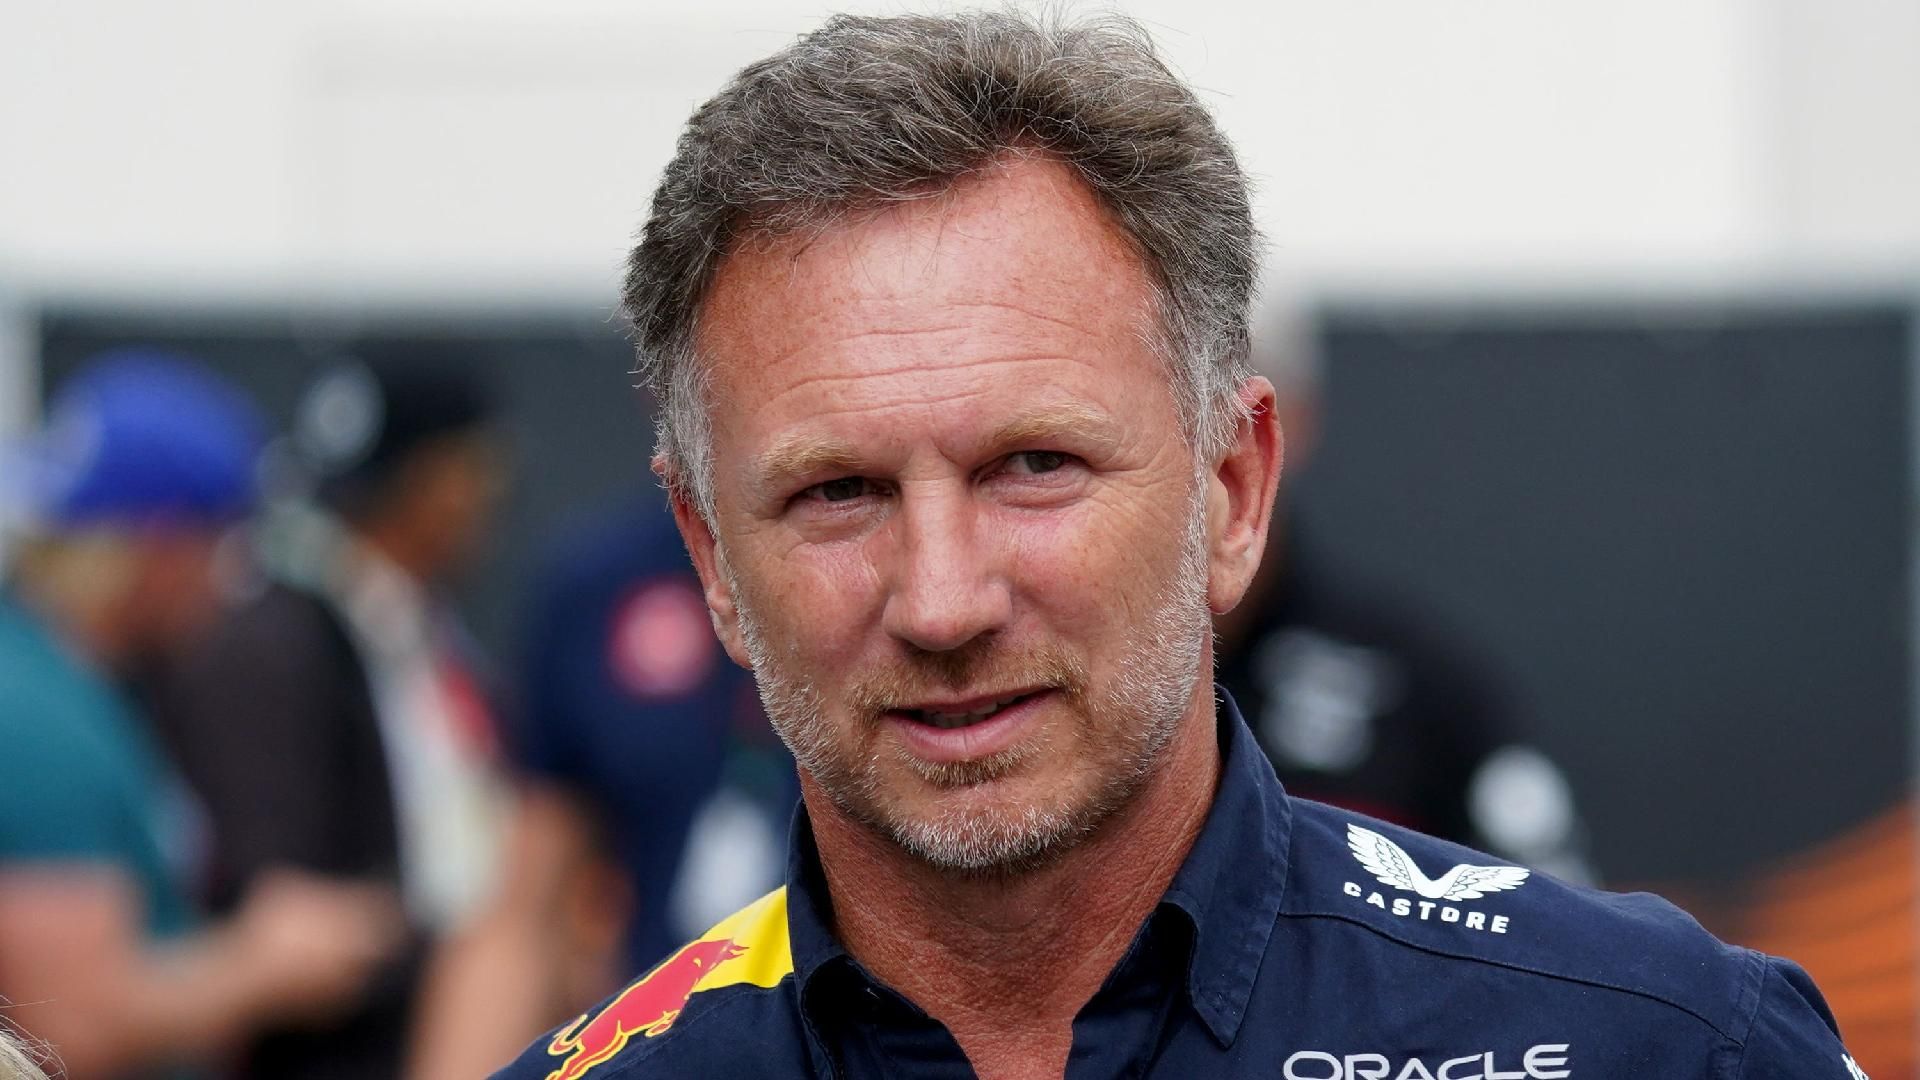 FIA will refrain from commenting until the investigation into Christian Horner is completed